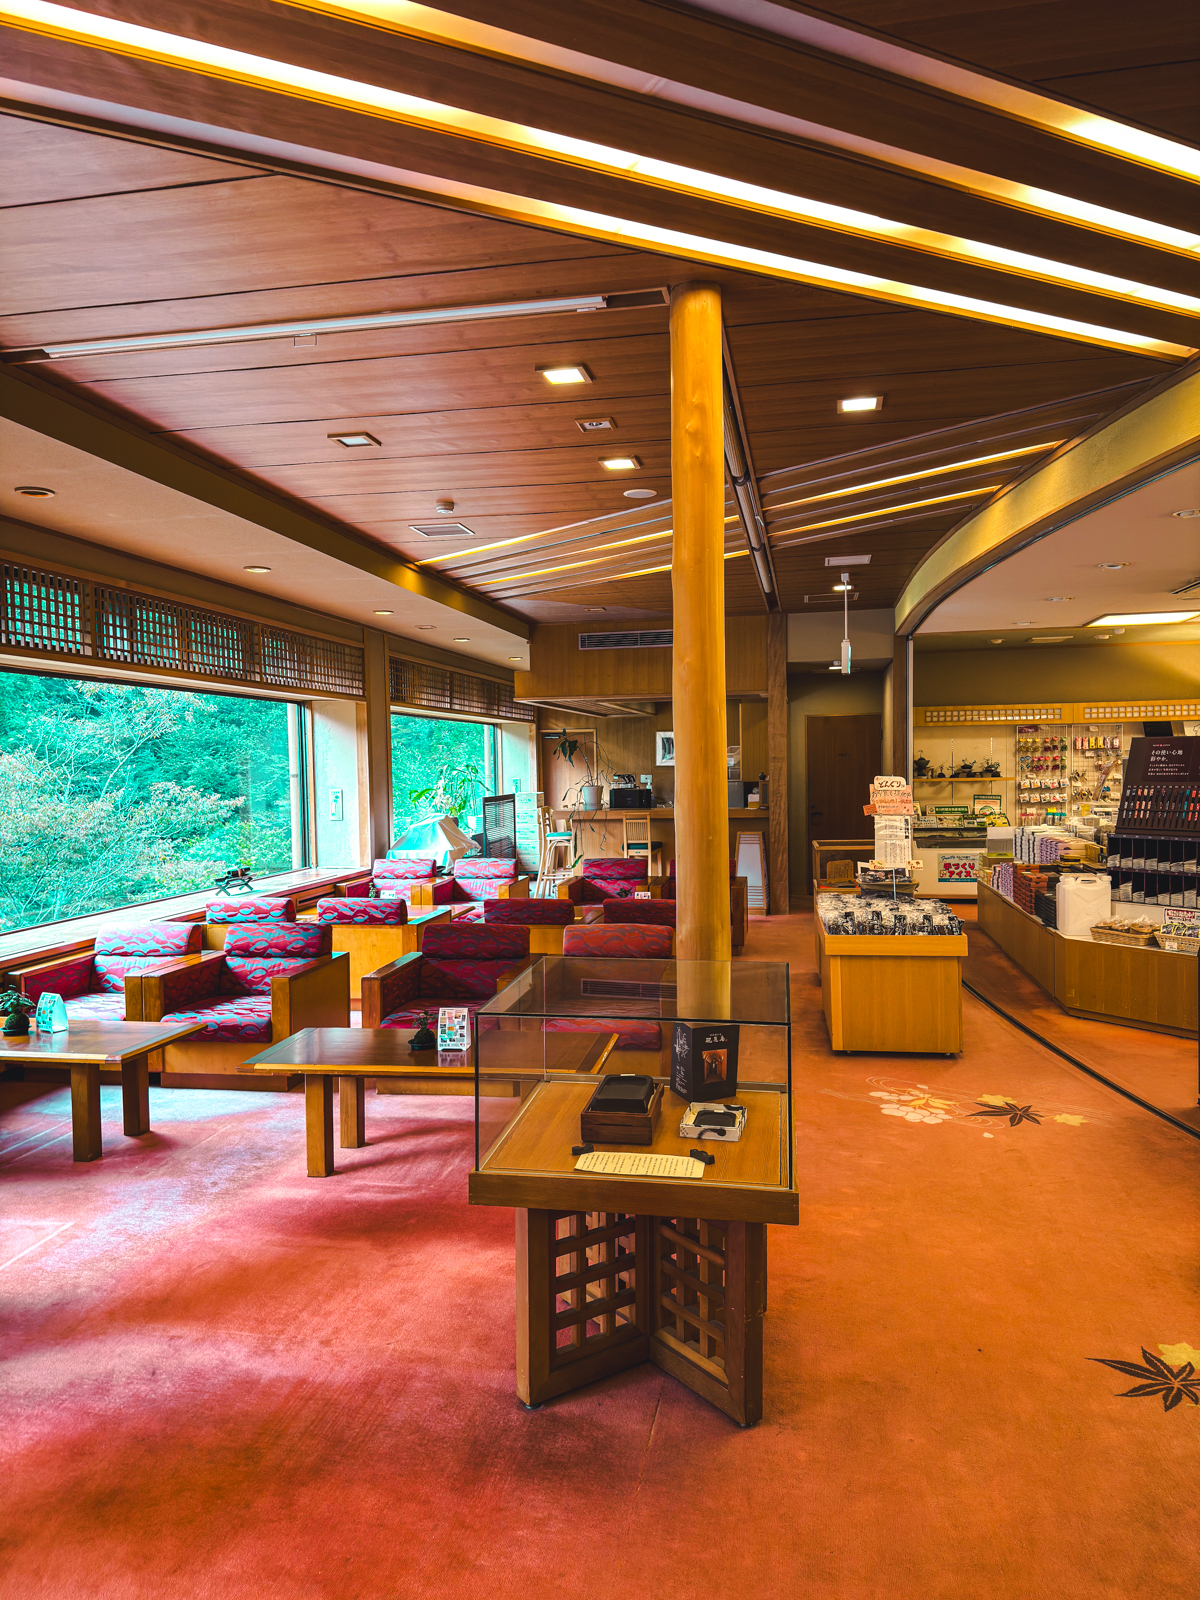 Nishiyama Onsen lobby area with red carpets, gift shop on the right and windows on the left.